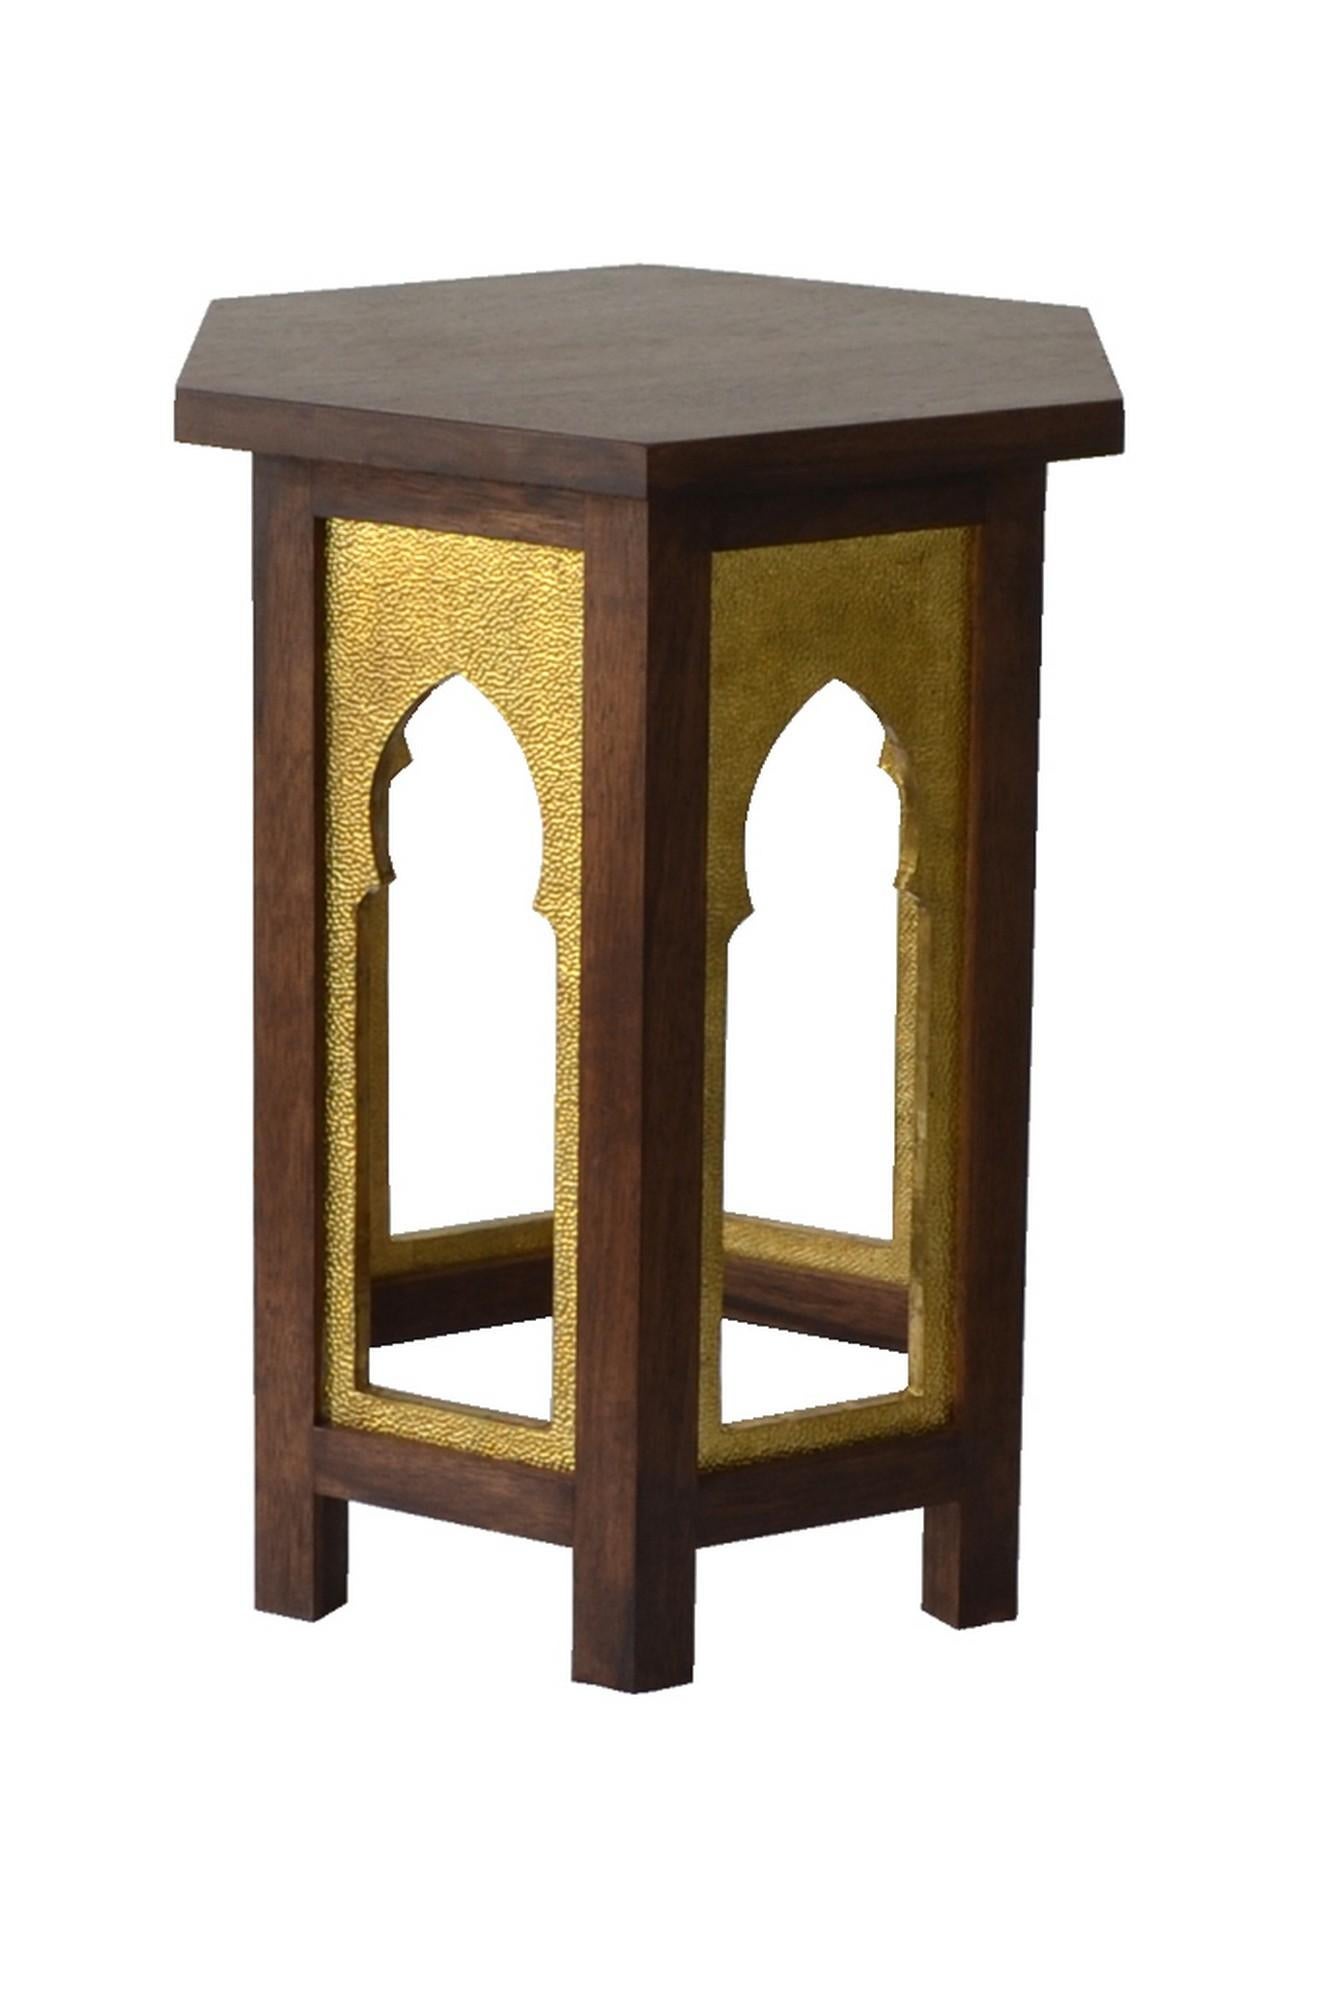 Inspired by the Mehraab element of Indian architecture, this simple design from Stephane Odegard's Udaipur Atelier, uses hammered brass clad mehraab on a hexagonal Mango wood table.
 
Mehraab Table Brass 
Size- 16